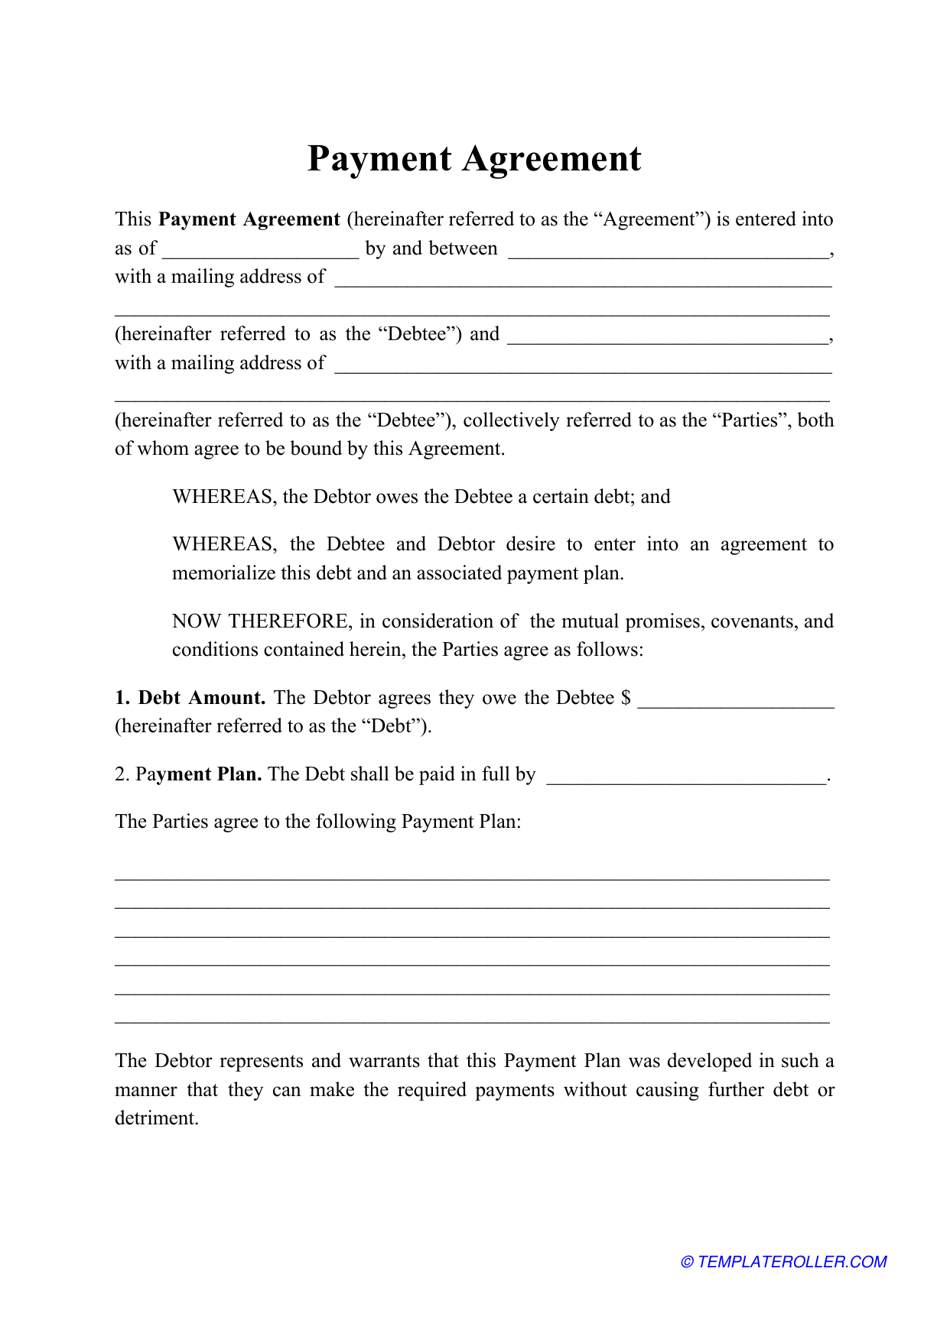 Payment Agreement Template Download Printable PDF  Templateroller Pertaining To private loan agreement template free